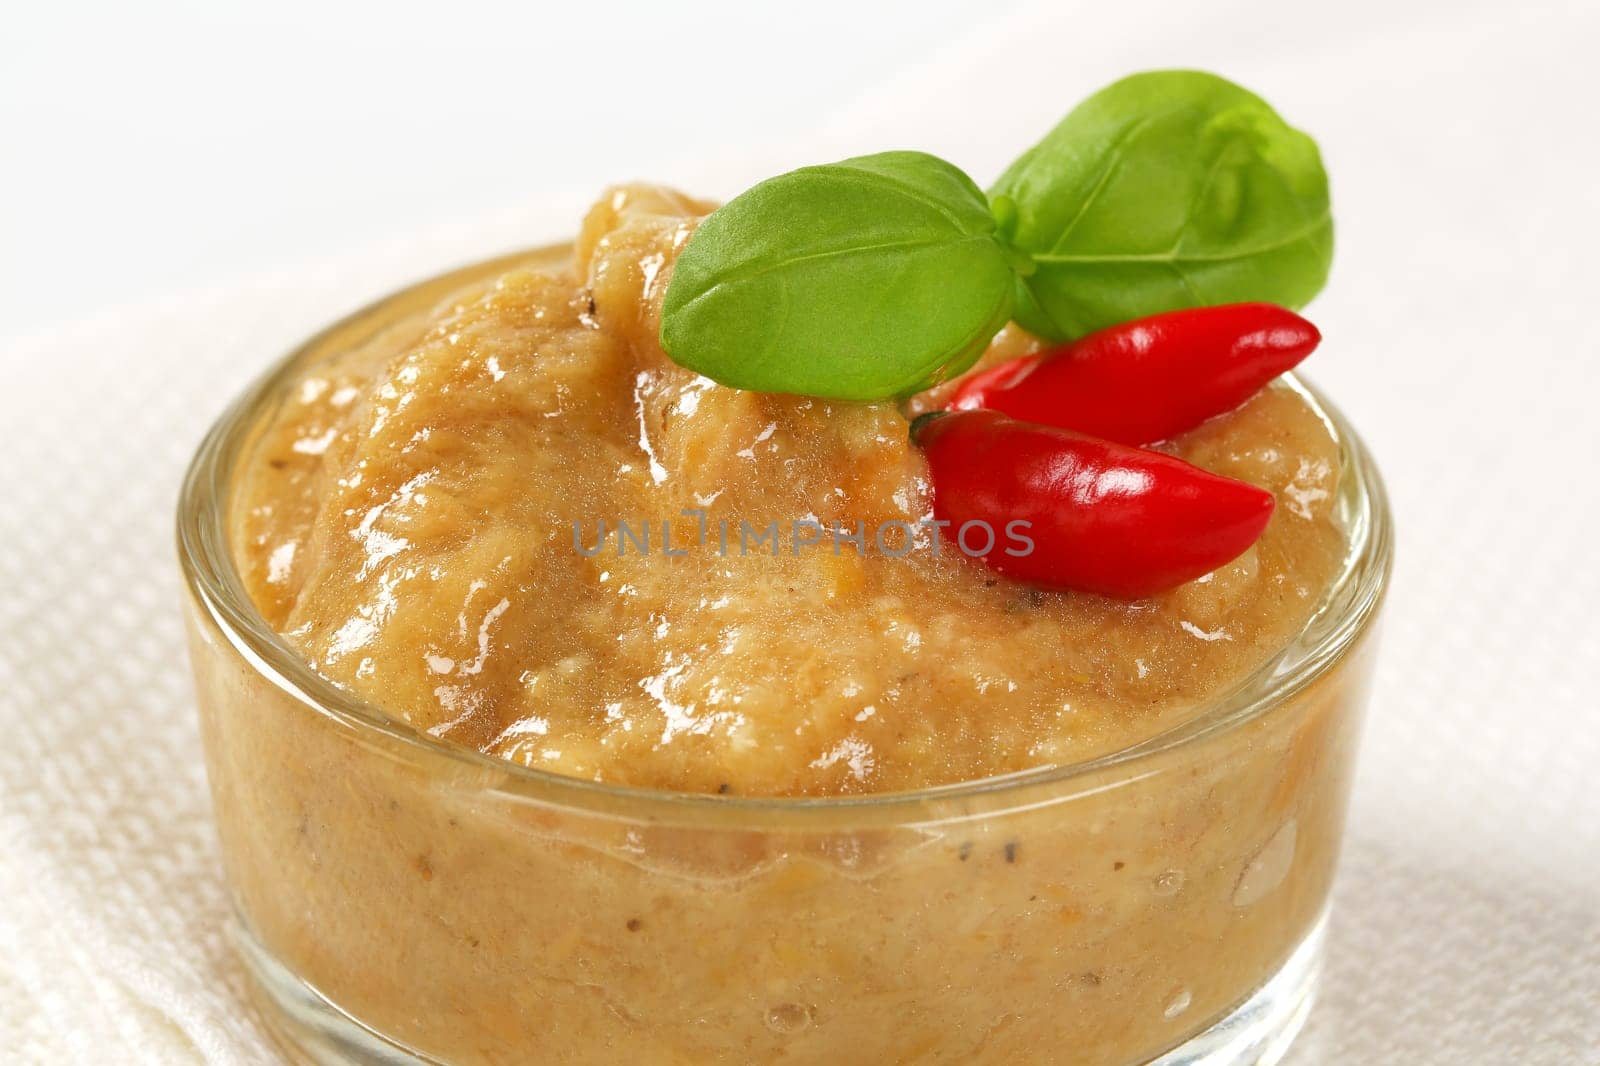 Eggplant dipping sauce or spread by Digifoodstock